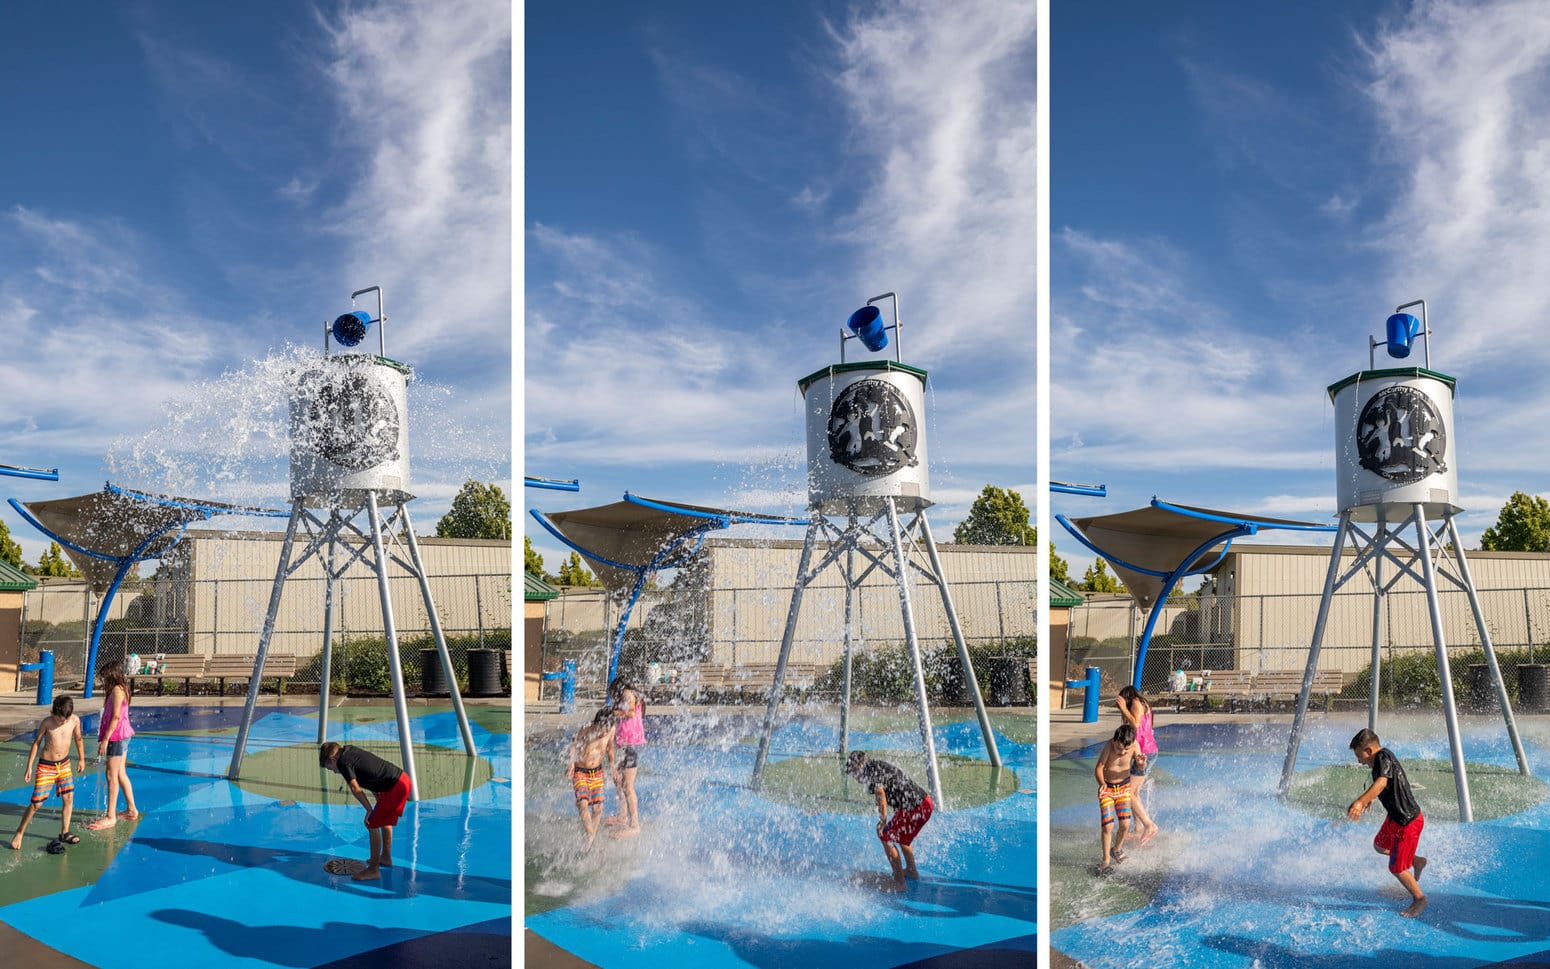 3 photos side by side showing bucket splashing water on playing children